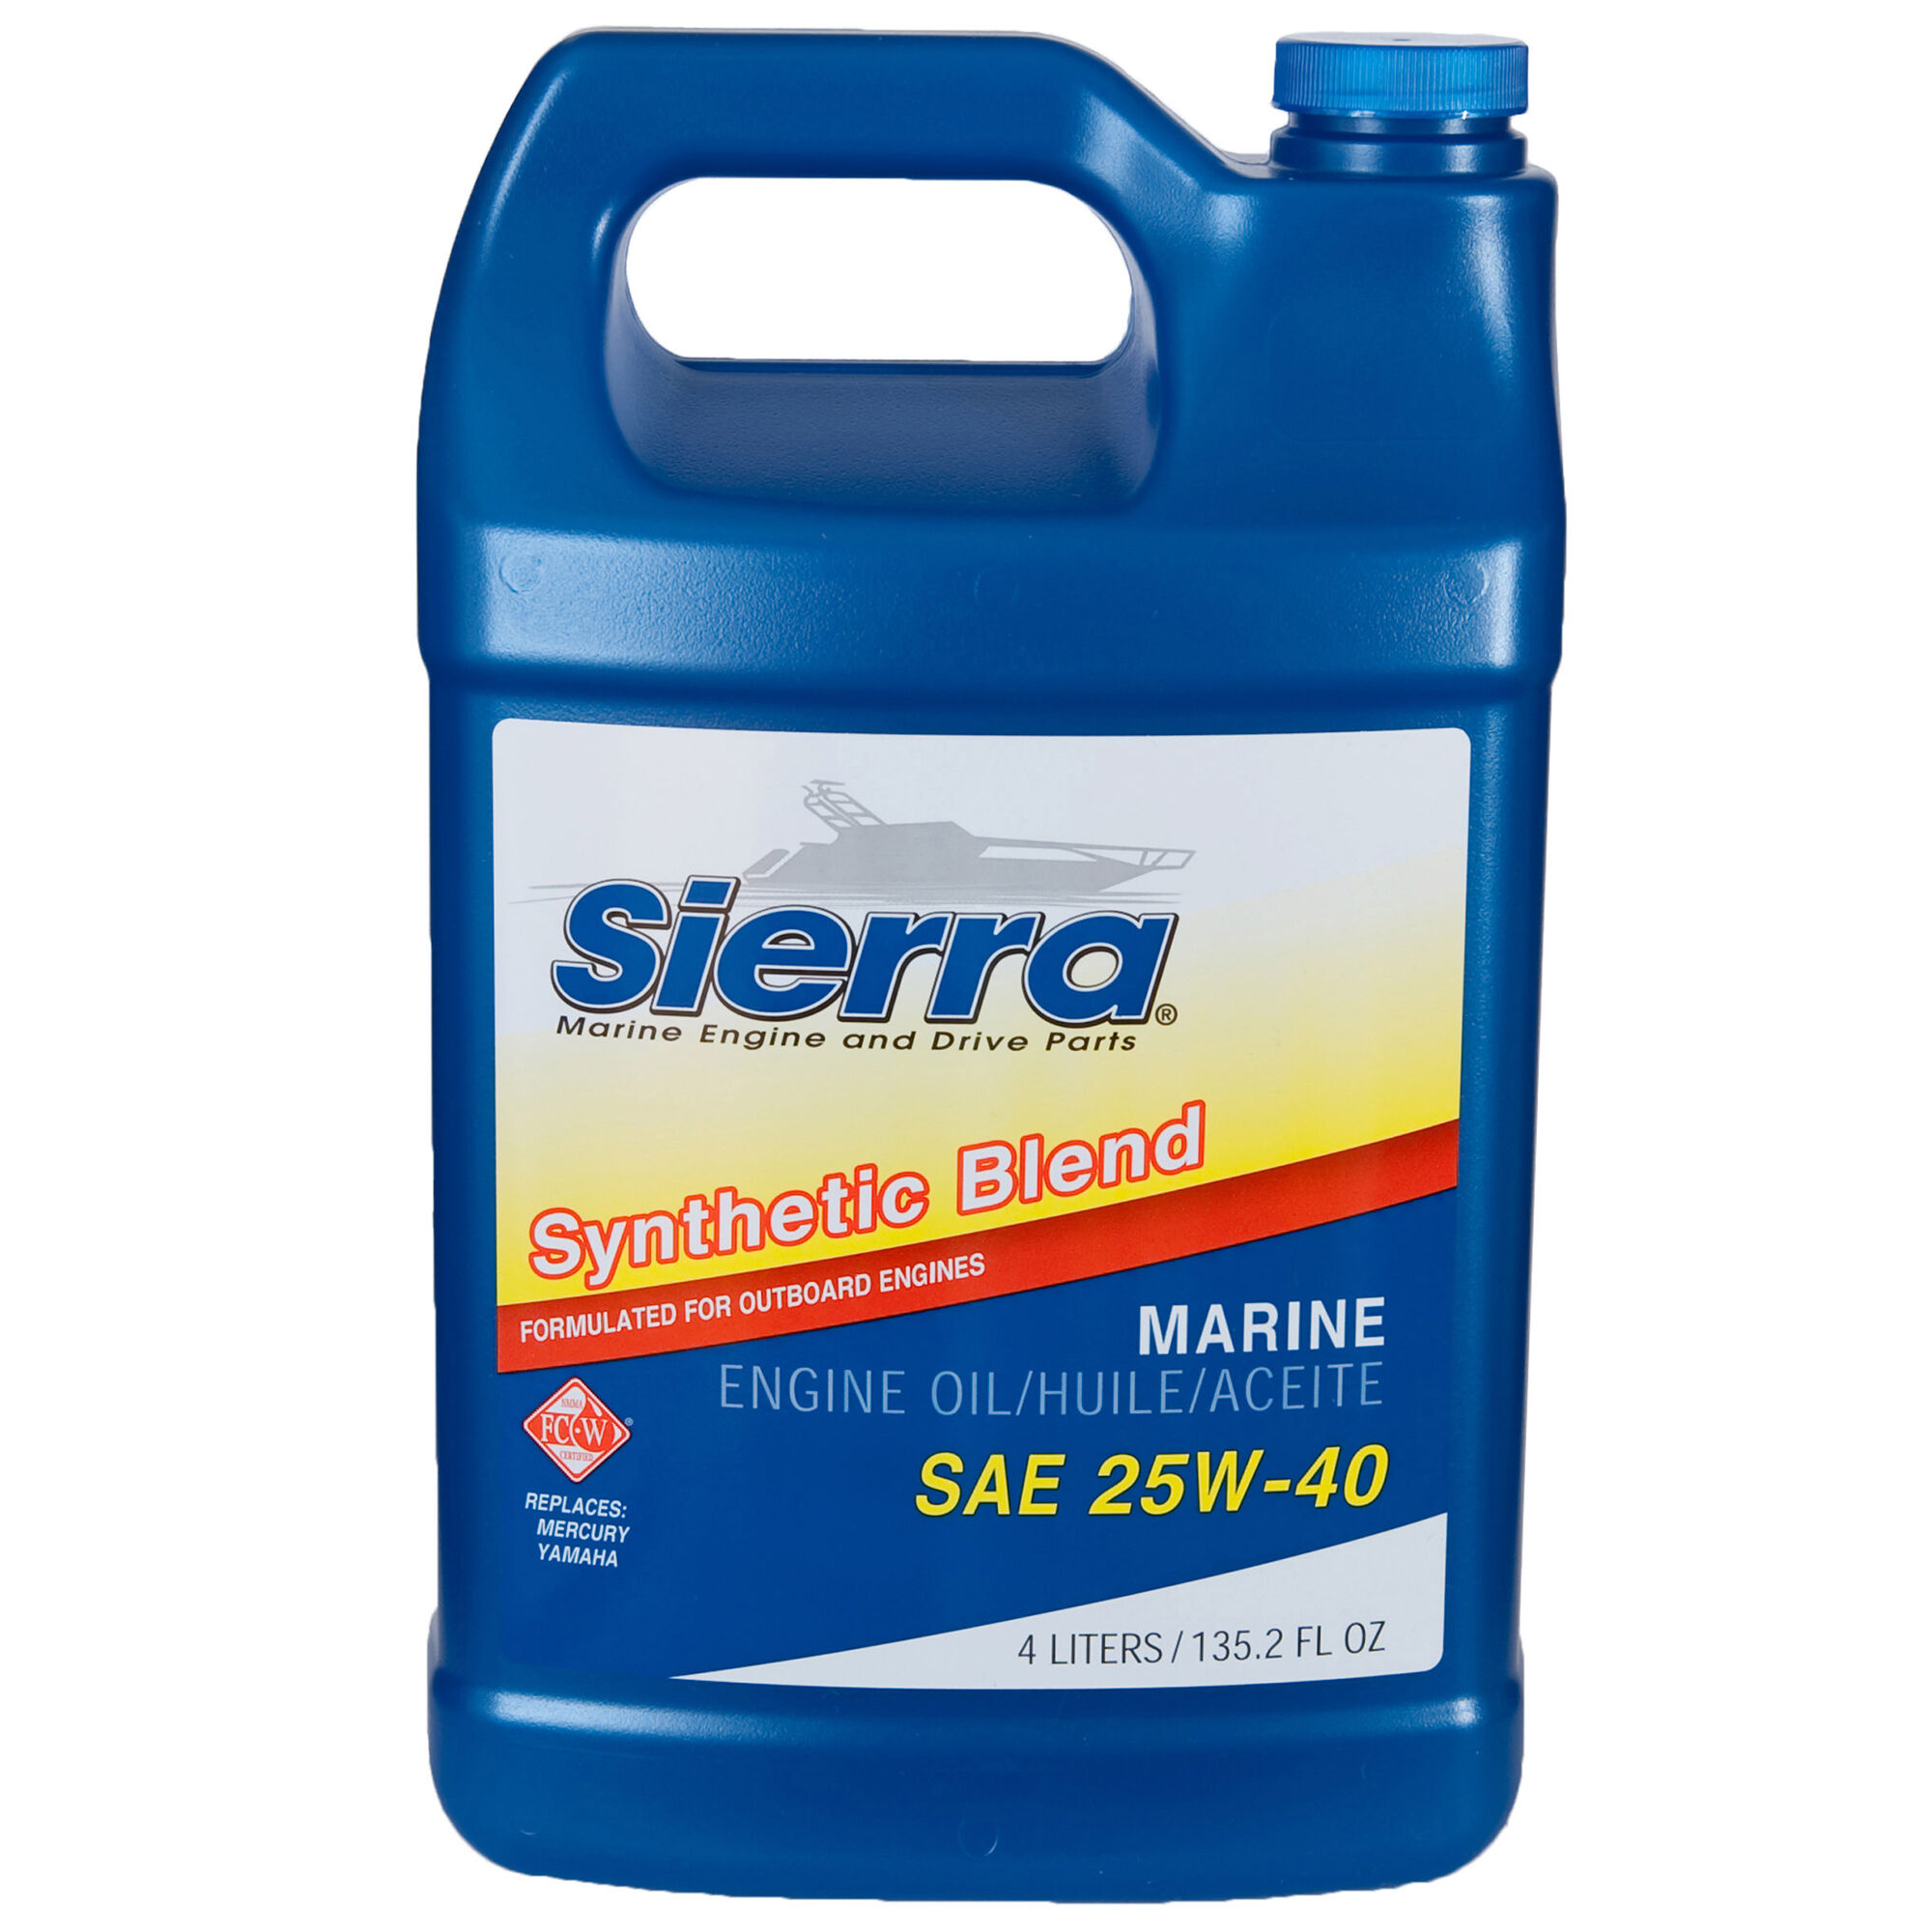 Sierra SAE 25W-40 Synthetic Blend Marine Engine Oil, 4L, Part #18-9440-3